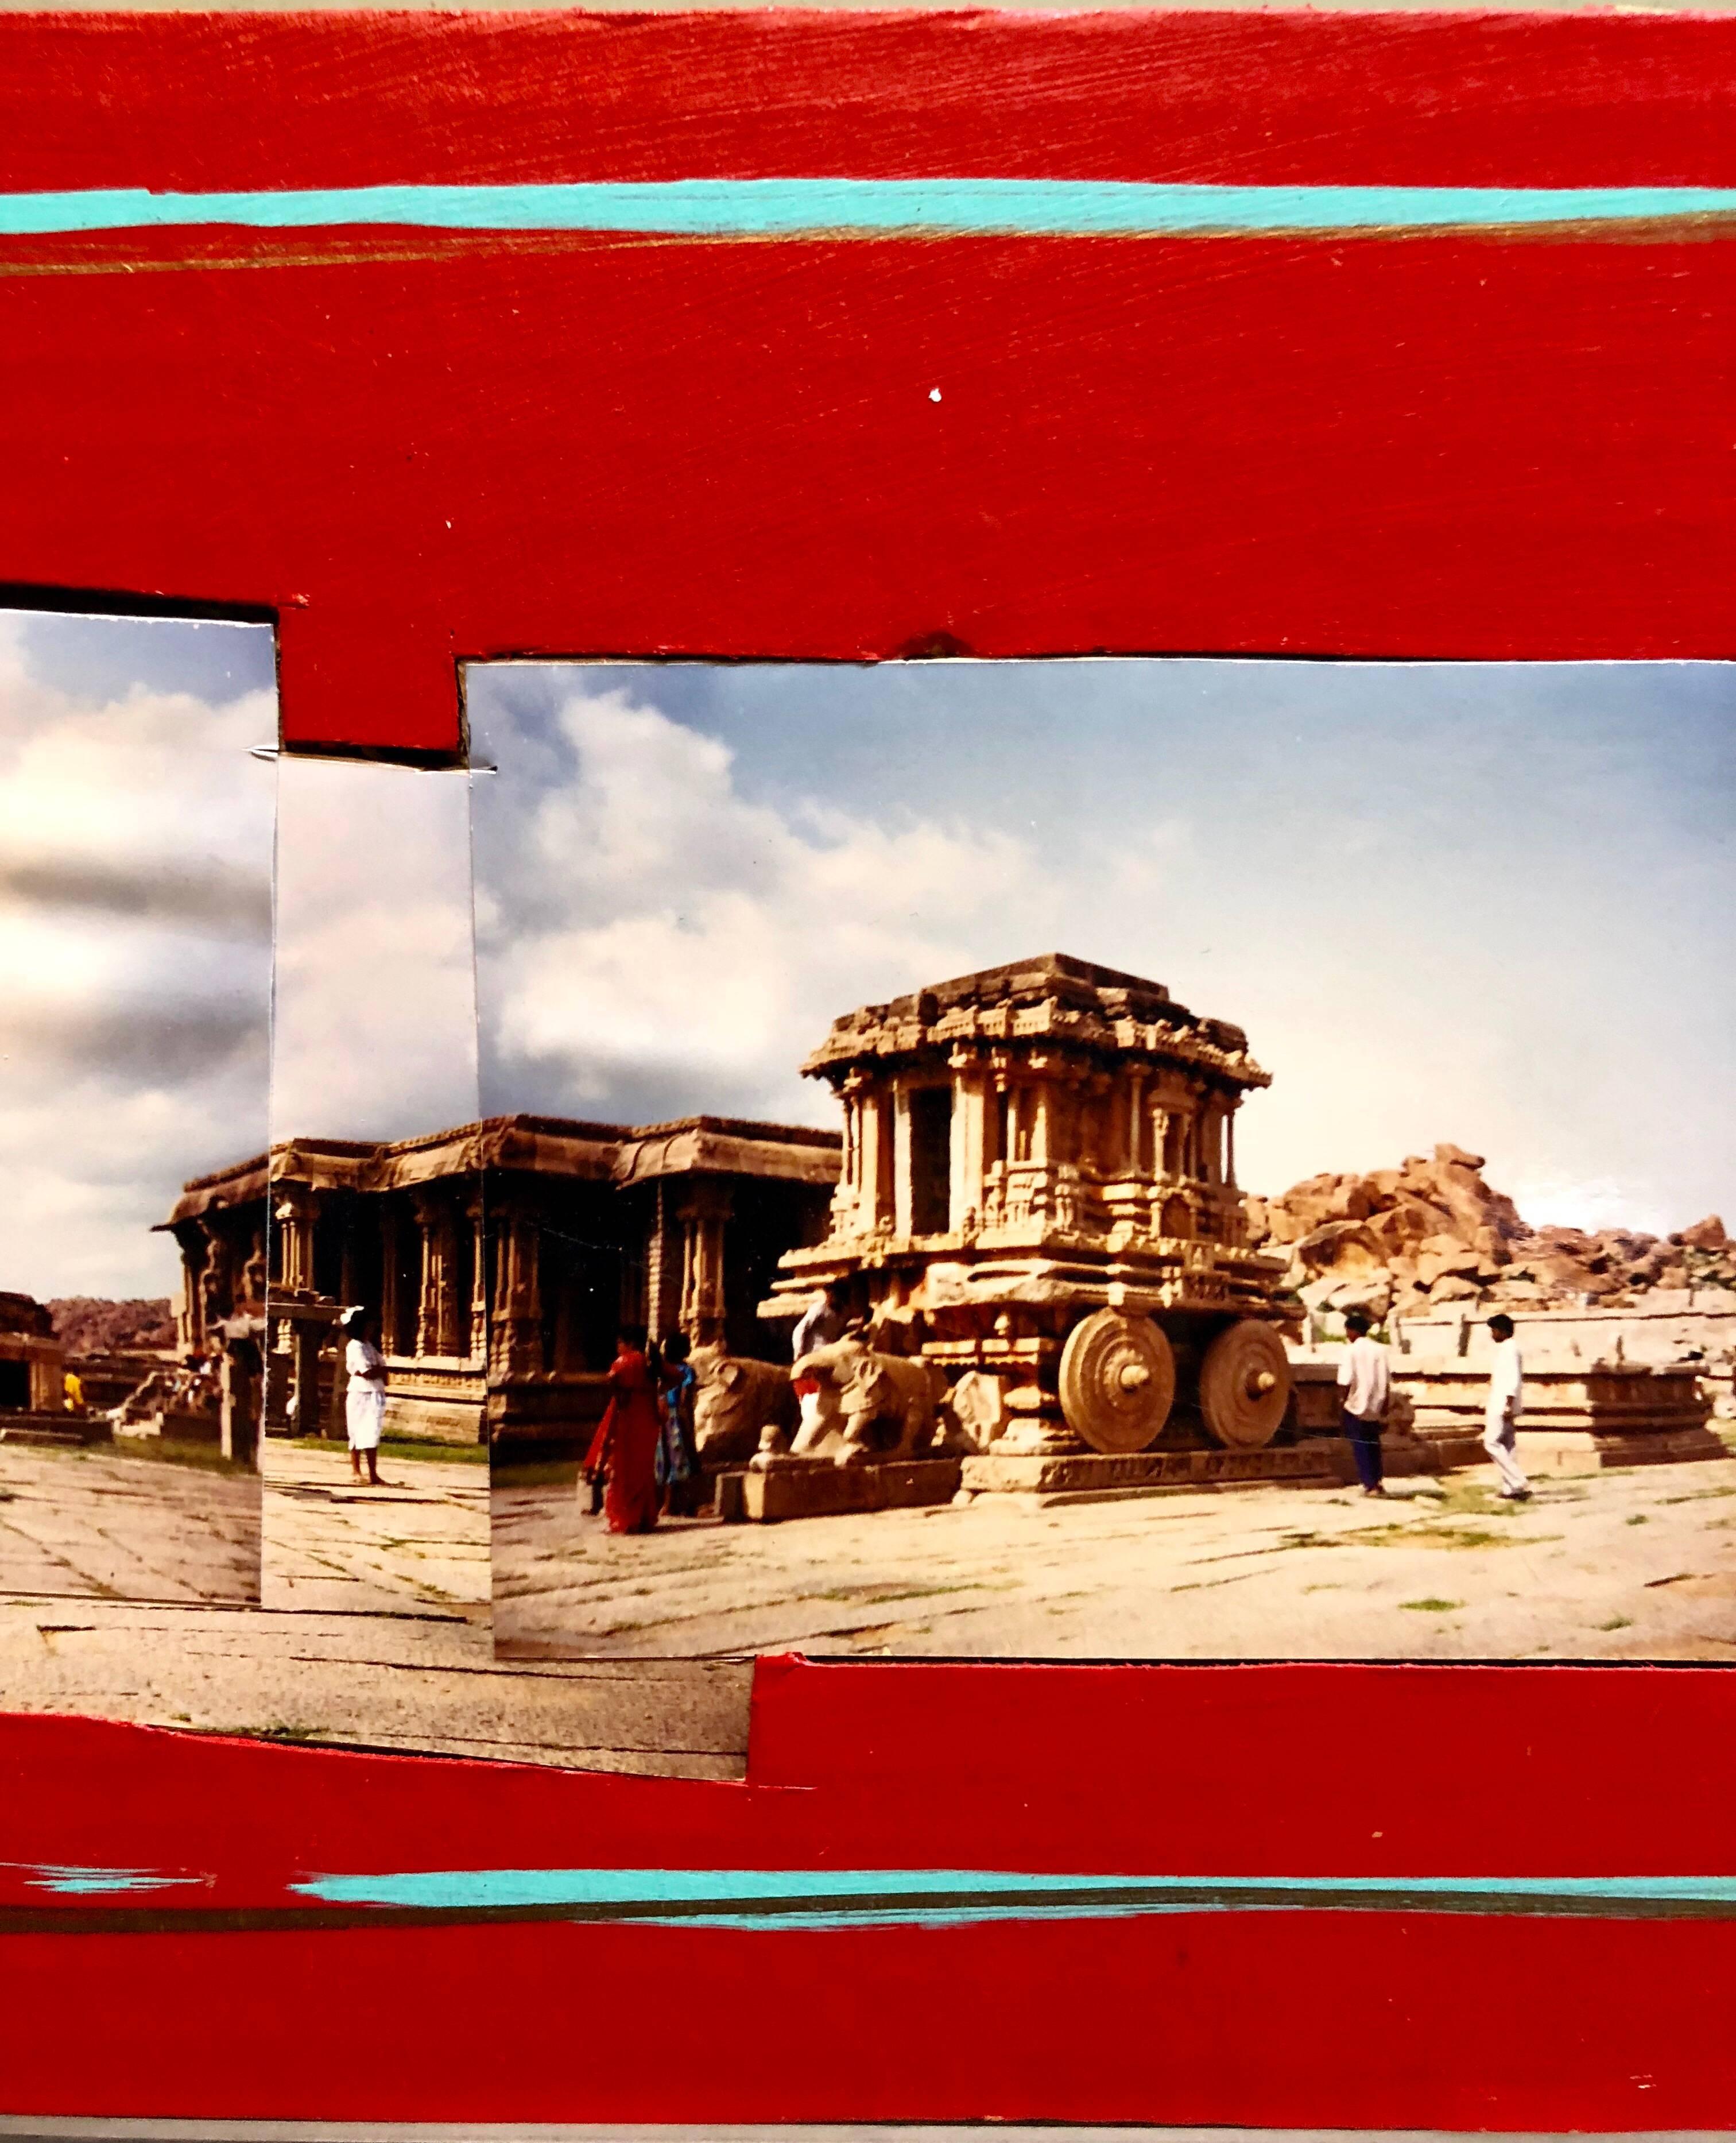 Tourists Hampi, India, 1992, Photo Prints on Cardboard, Collage, Mirror Insets - Contemporary Painting by Kim MacConnel